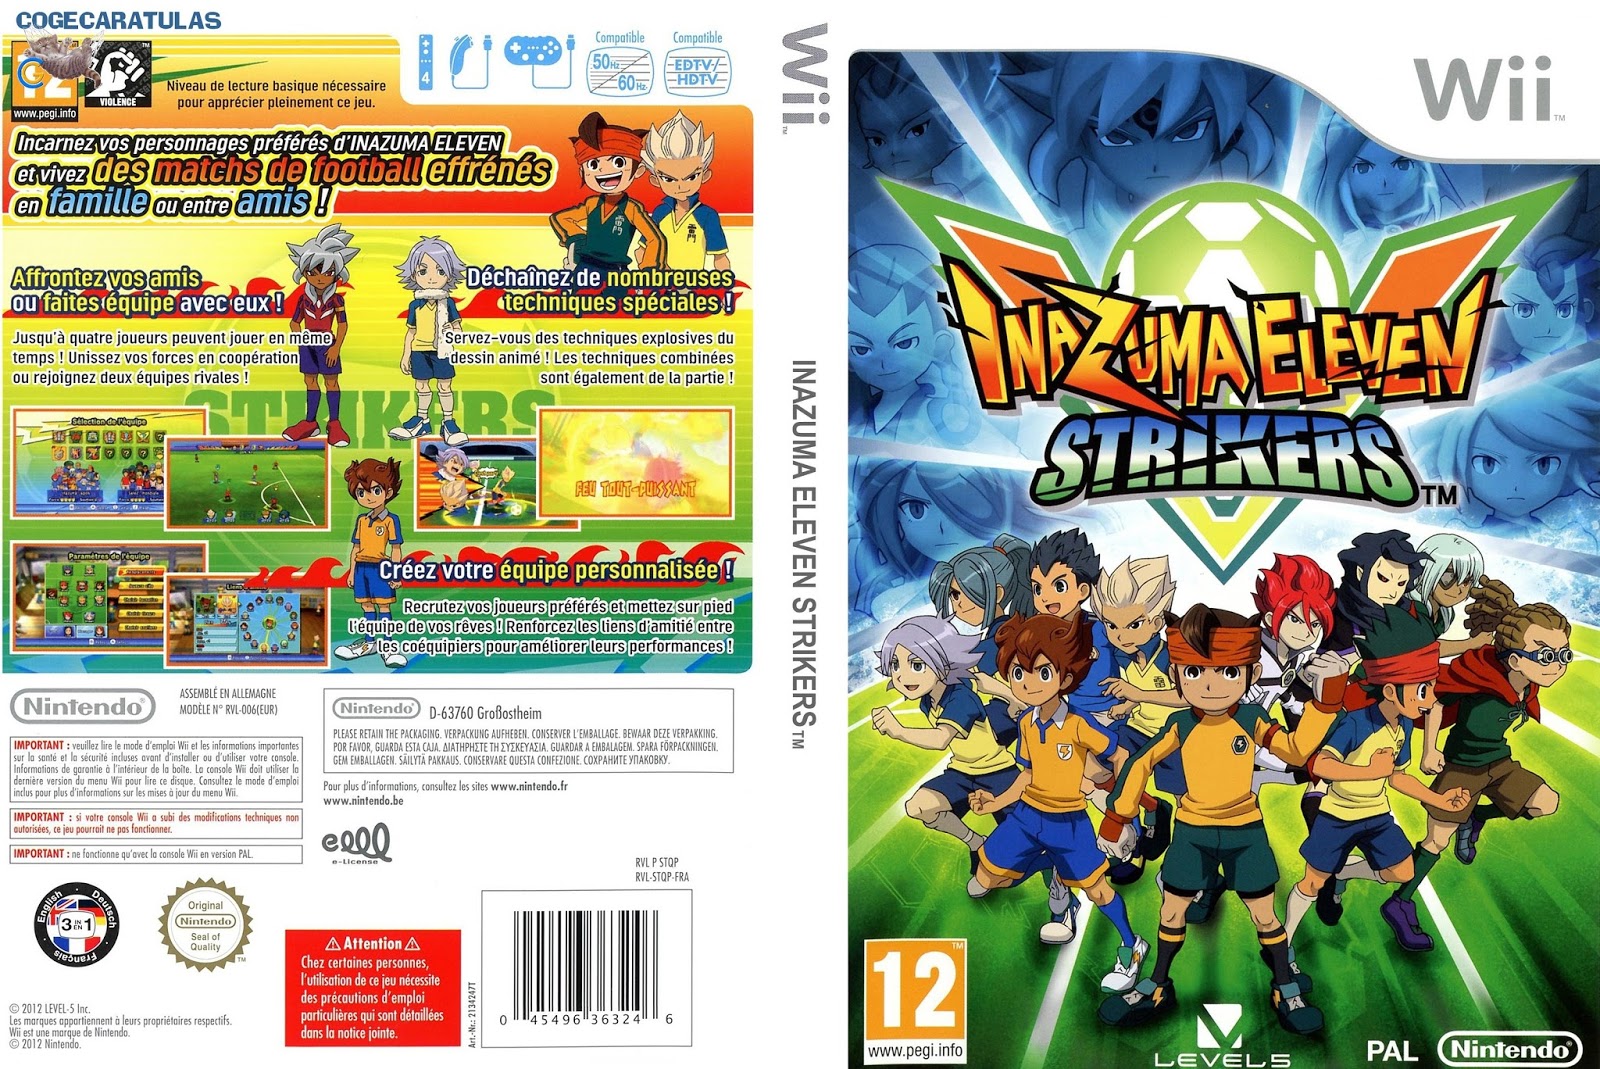 Inazuma Eleven Strikers Pics, Video Game Collection